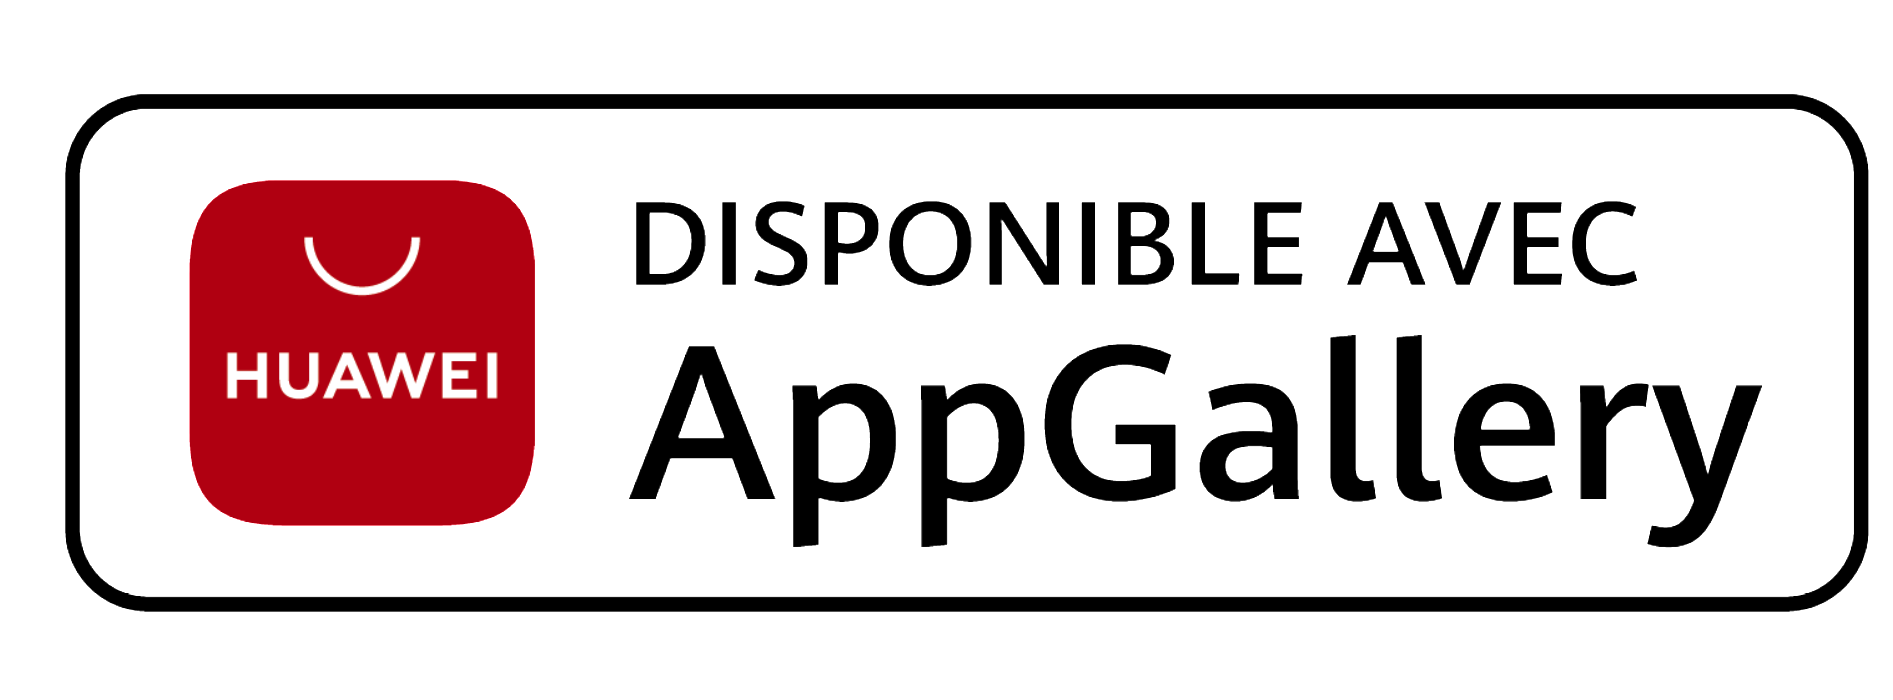 go to AppGallery